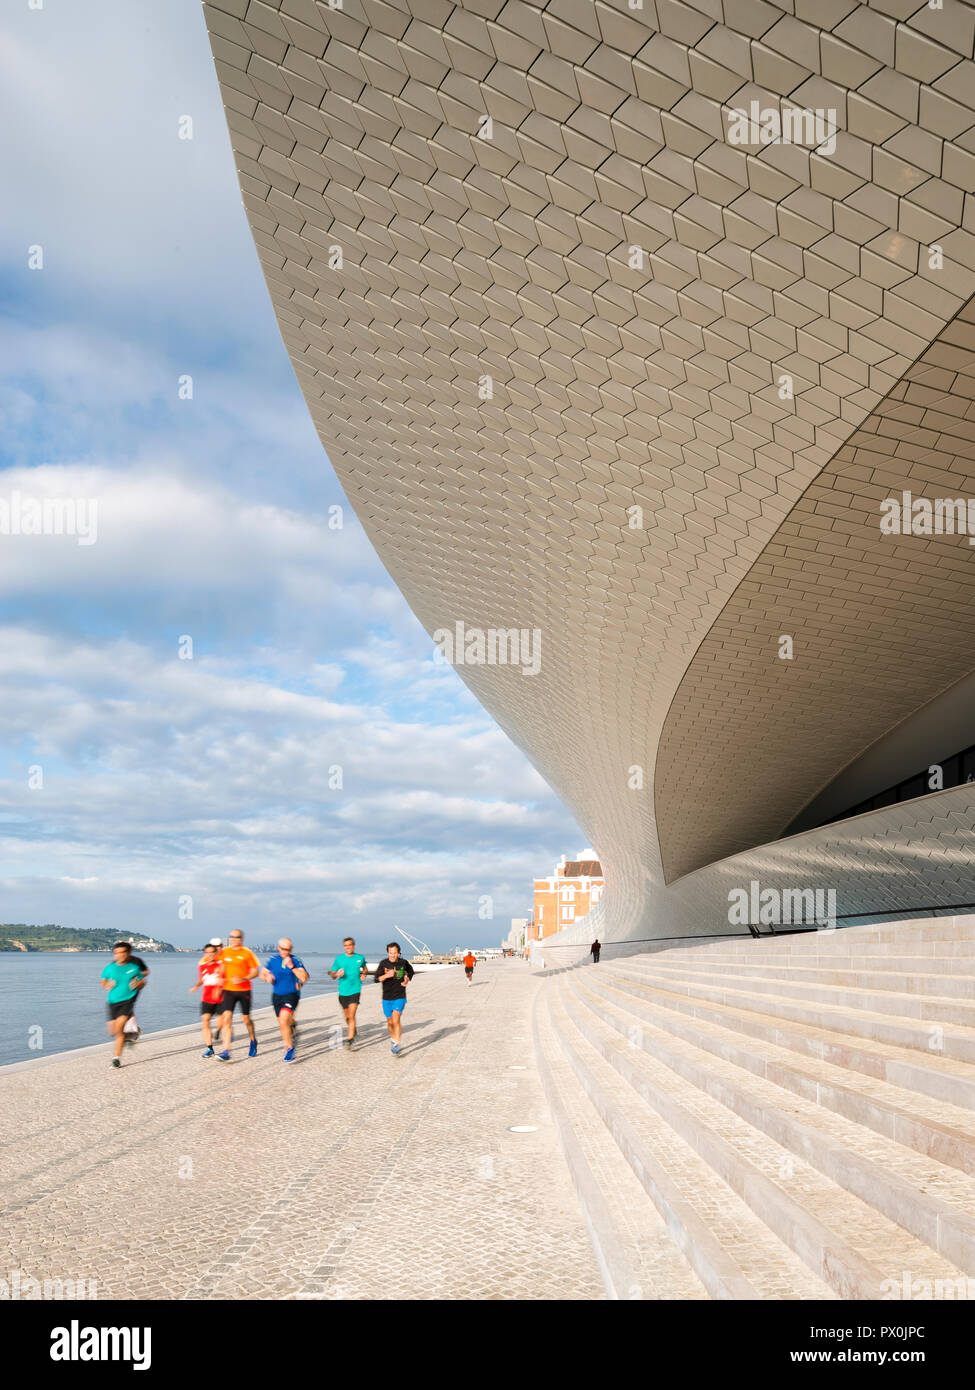 Exterior view of The MAAT - Museum of Art, Architecture and Technology, Lisbon, Portugal. Group of joggers on steps of terrace. Stock Photo